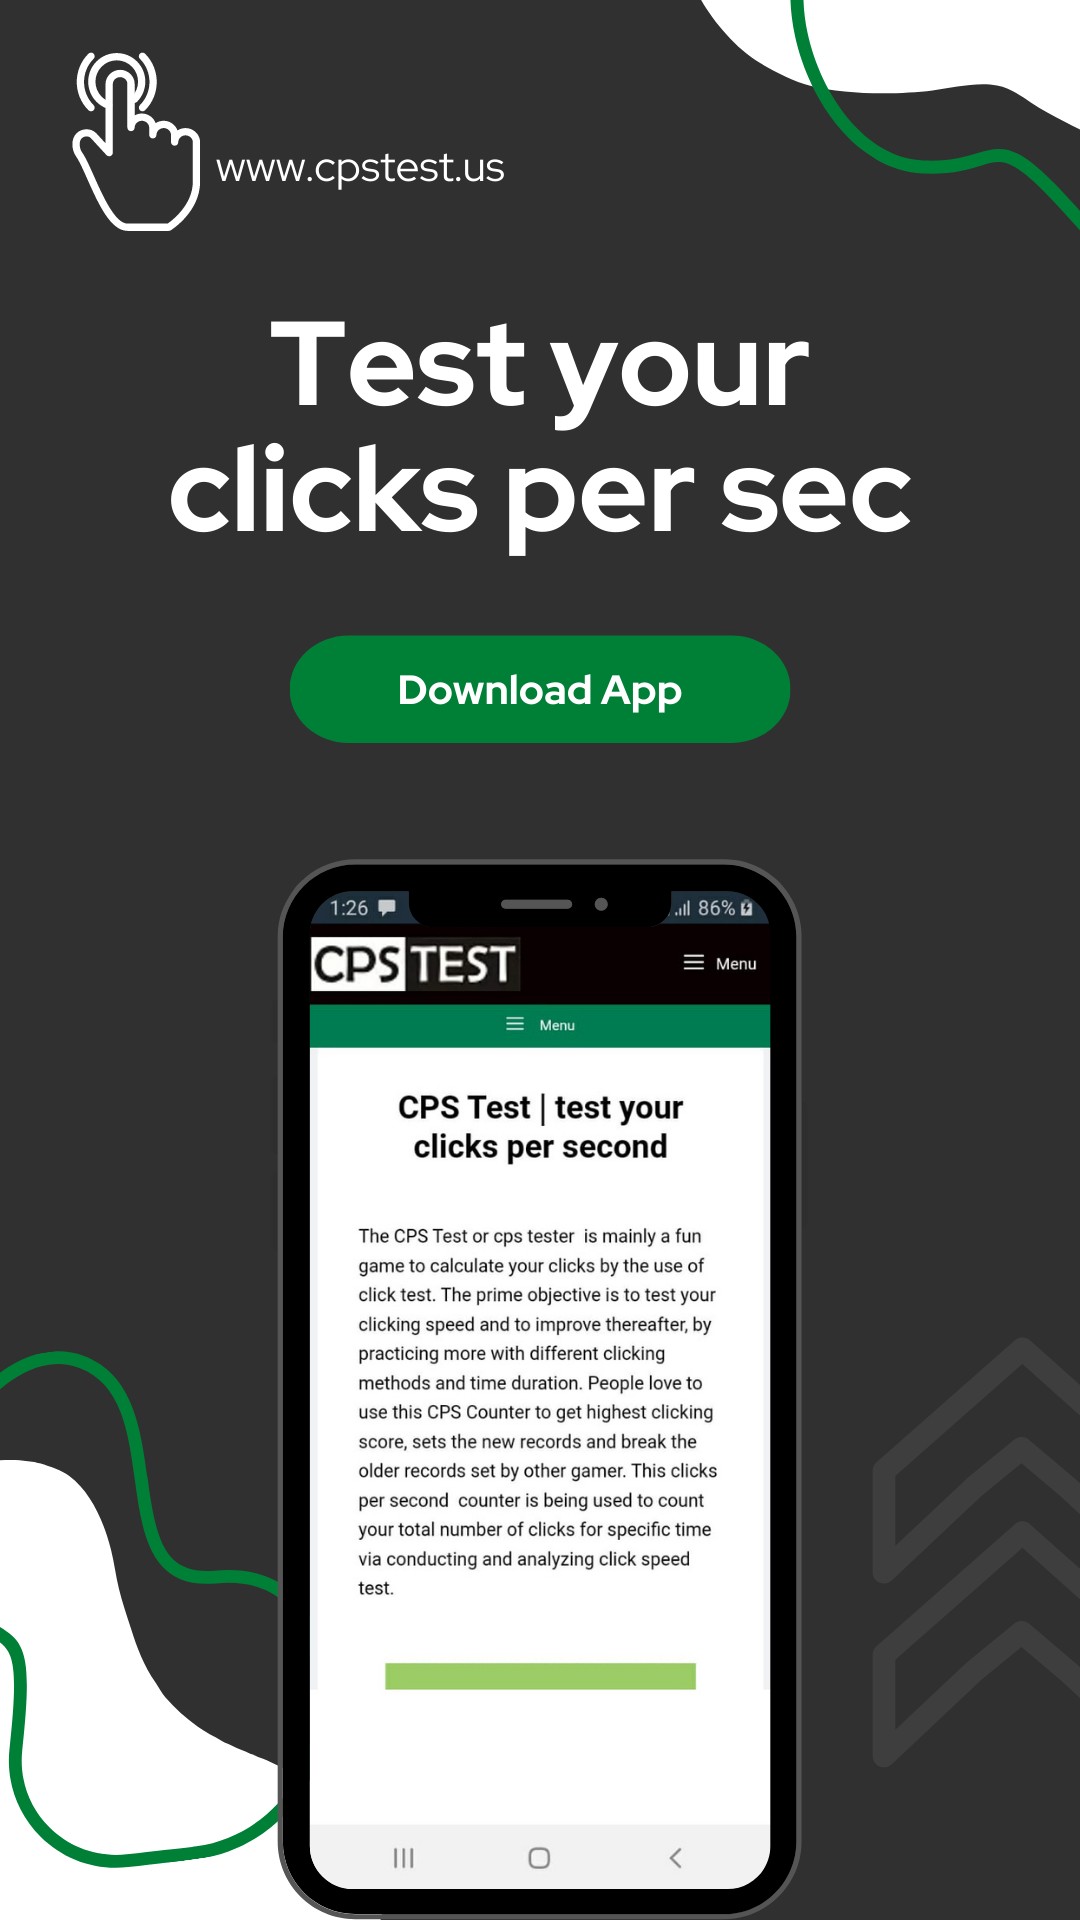 CPS Test Online by CPS Test on Dribbble